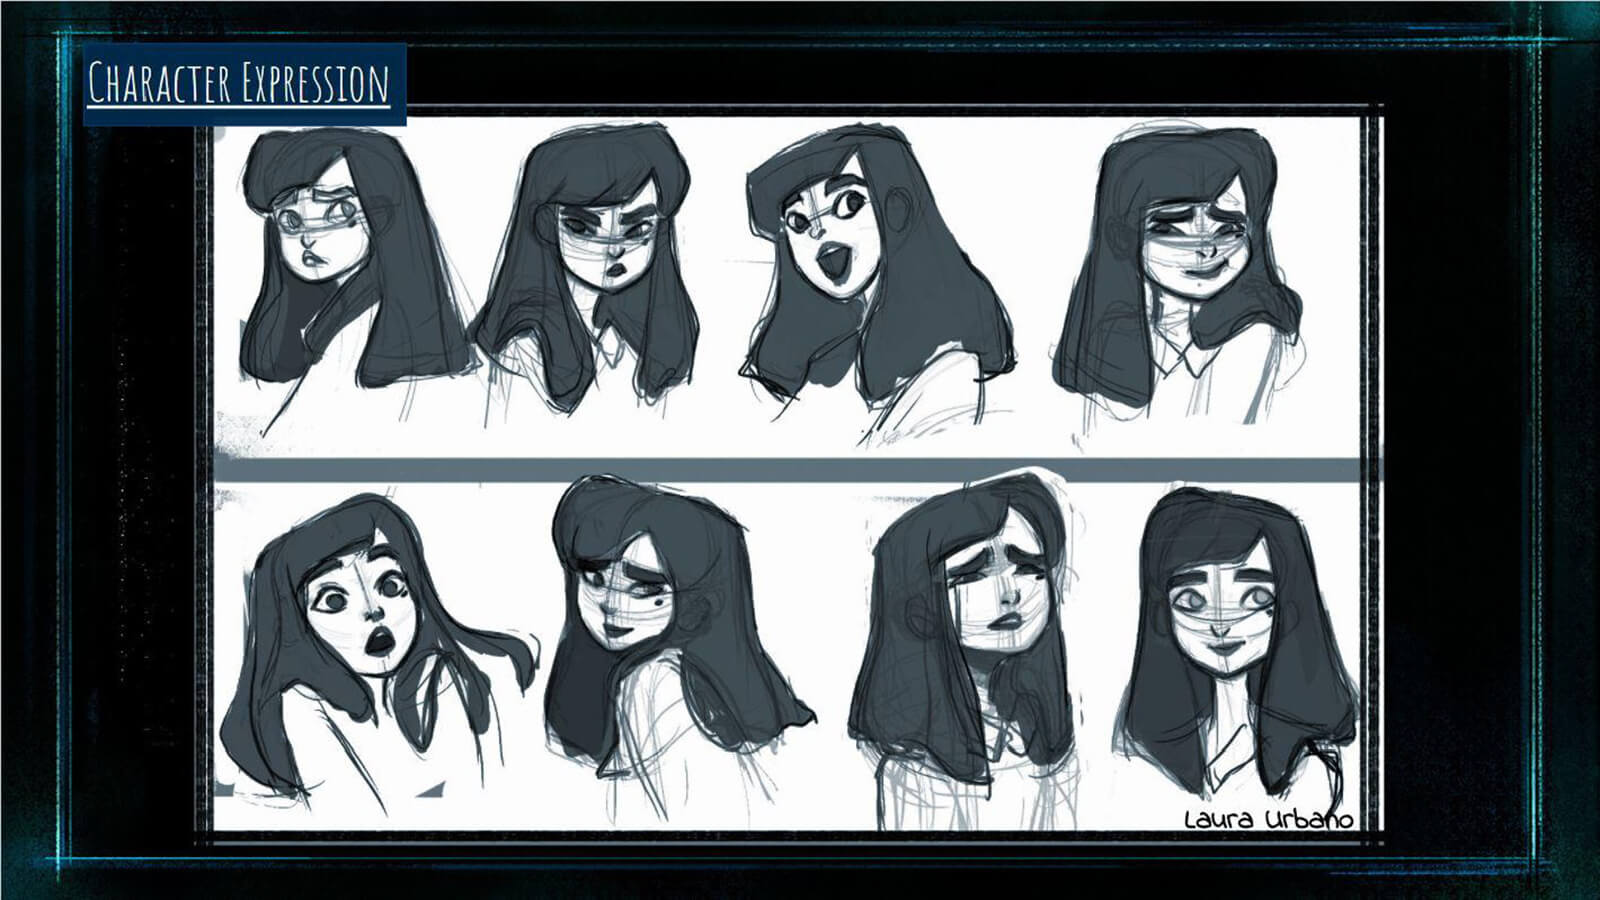 A "Character Expression" sheet showing the film's main character Tristesse making various facial expressions.